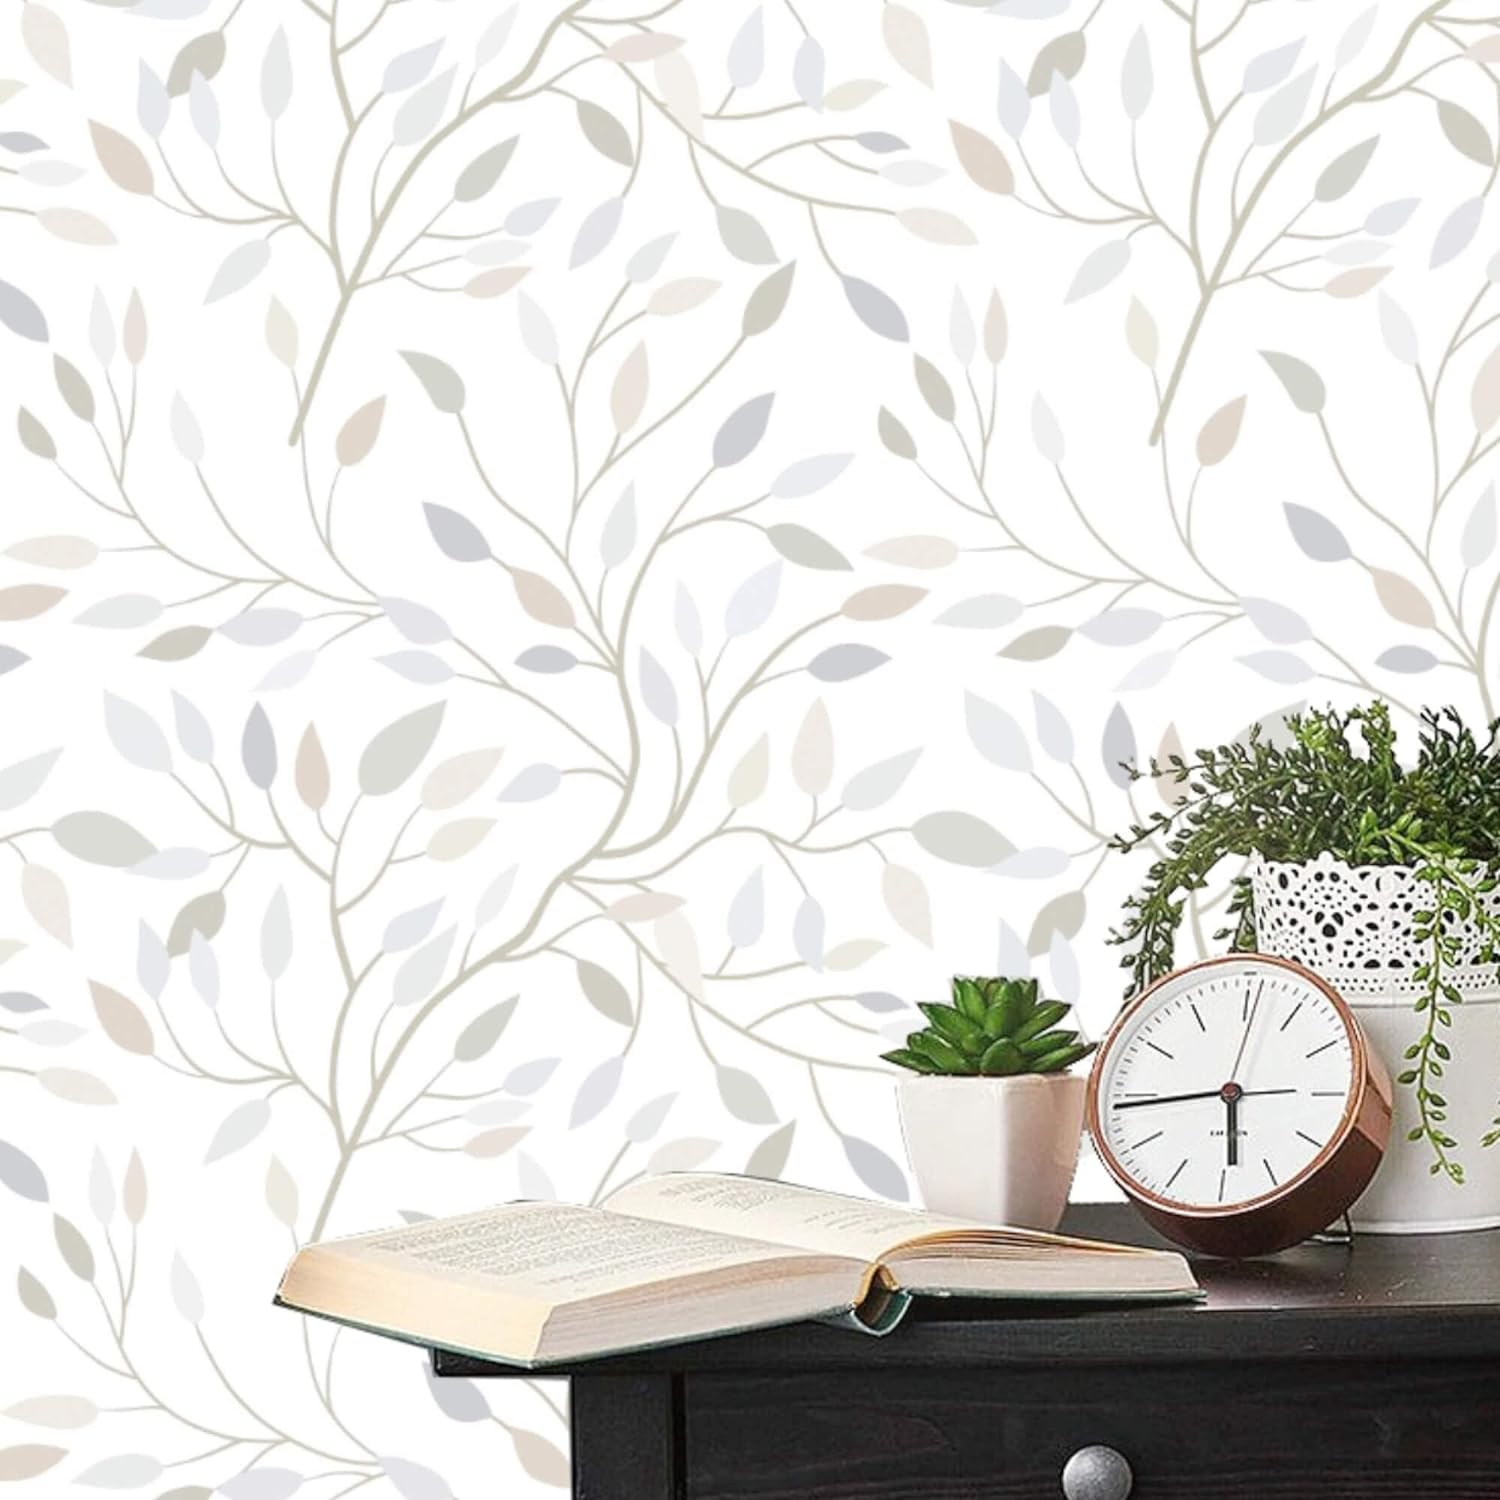 Heroad Brand Boho Peel and Stick Wallpaper Leaf Contact Paper Peel and Stick Floral Removable Wallpaper Self Adhesive Wallpaper for Walls Cabinets Shelf Liner Thicken Vinyl Roll 15.5 x 118